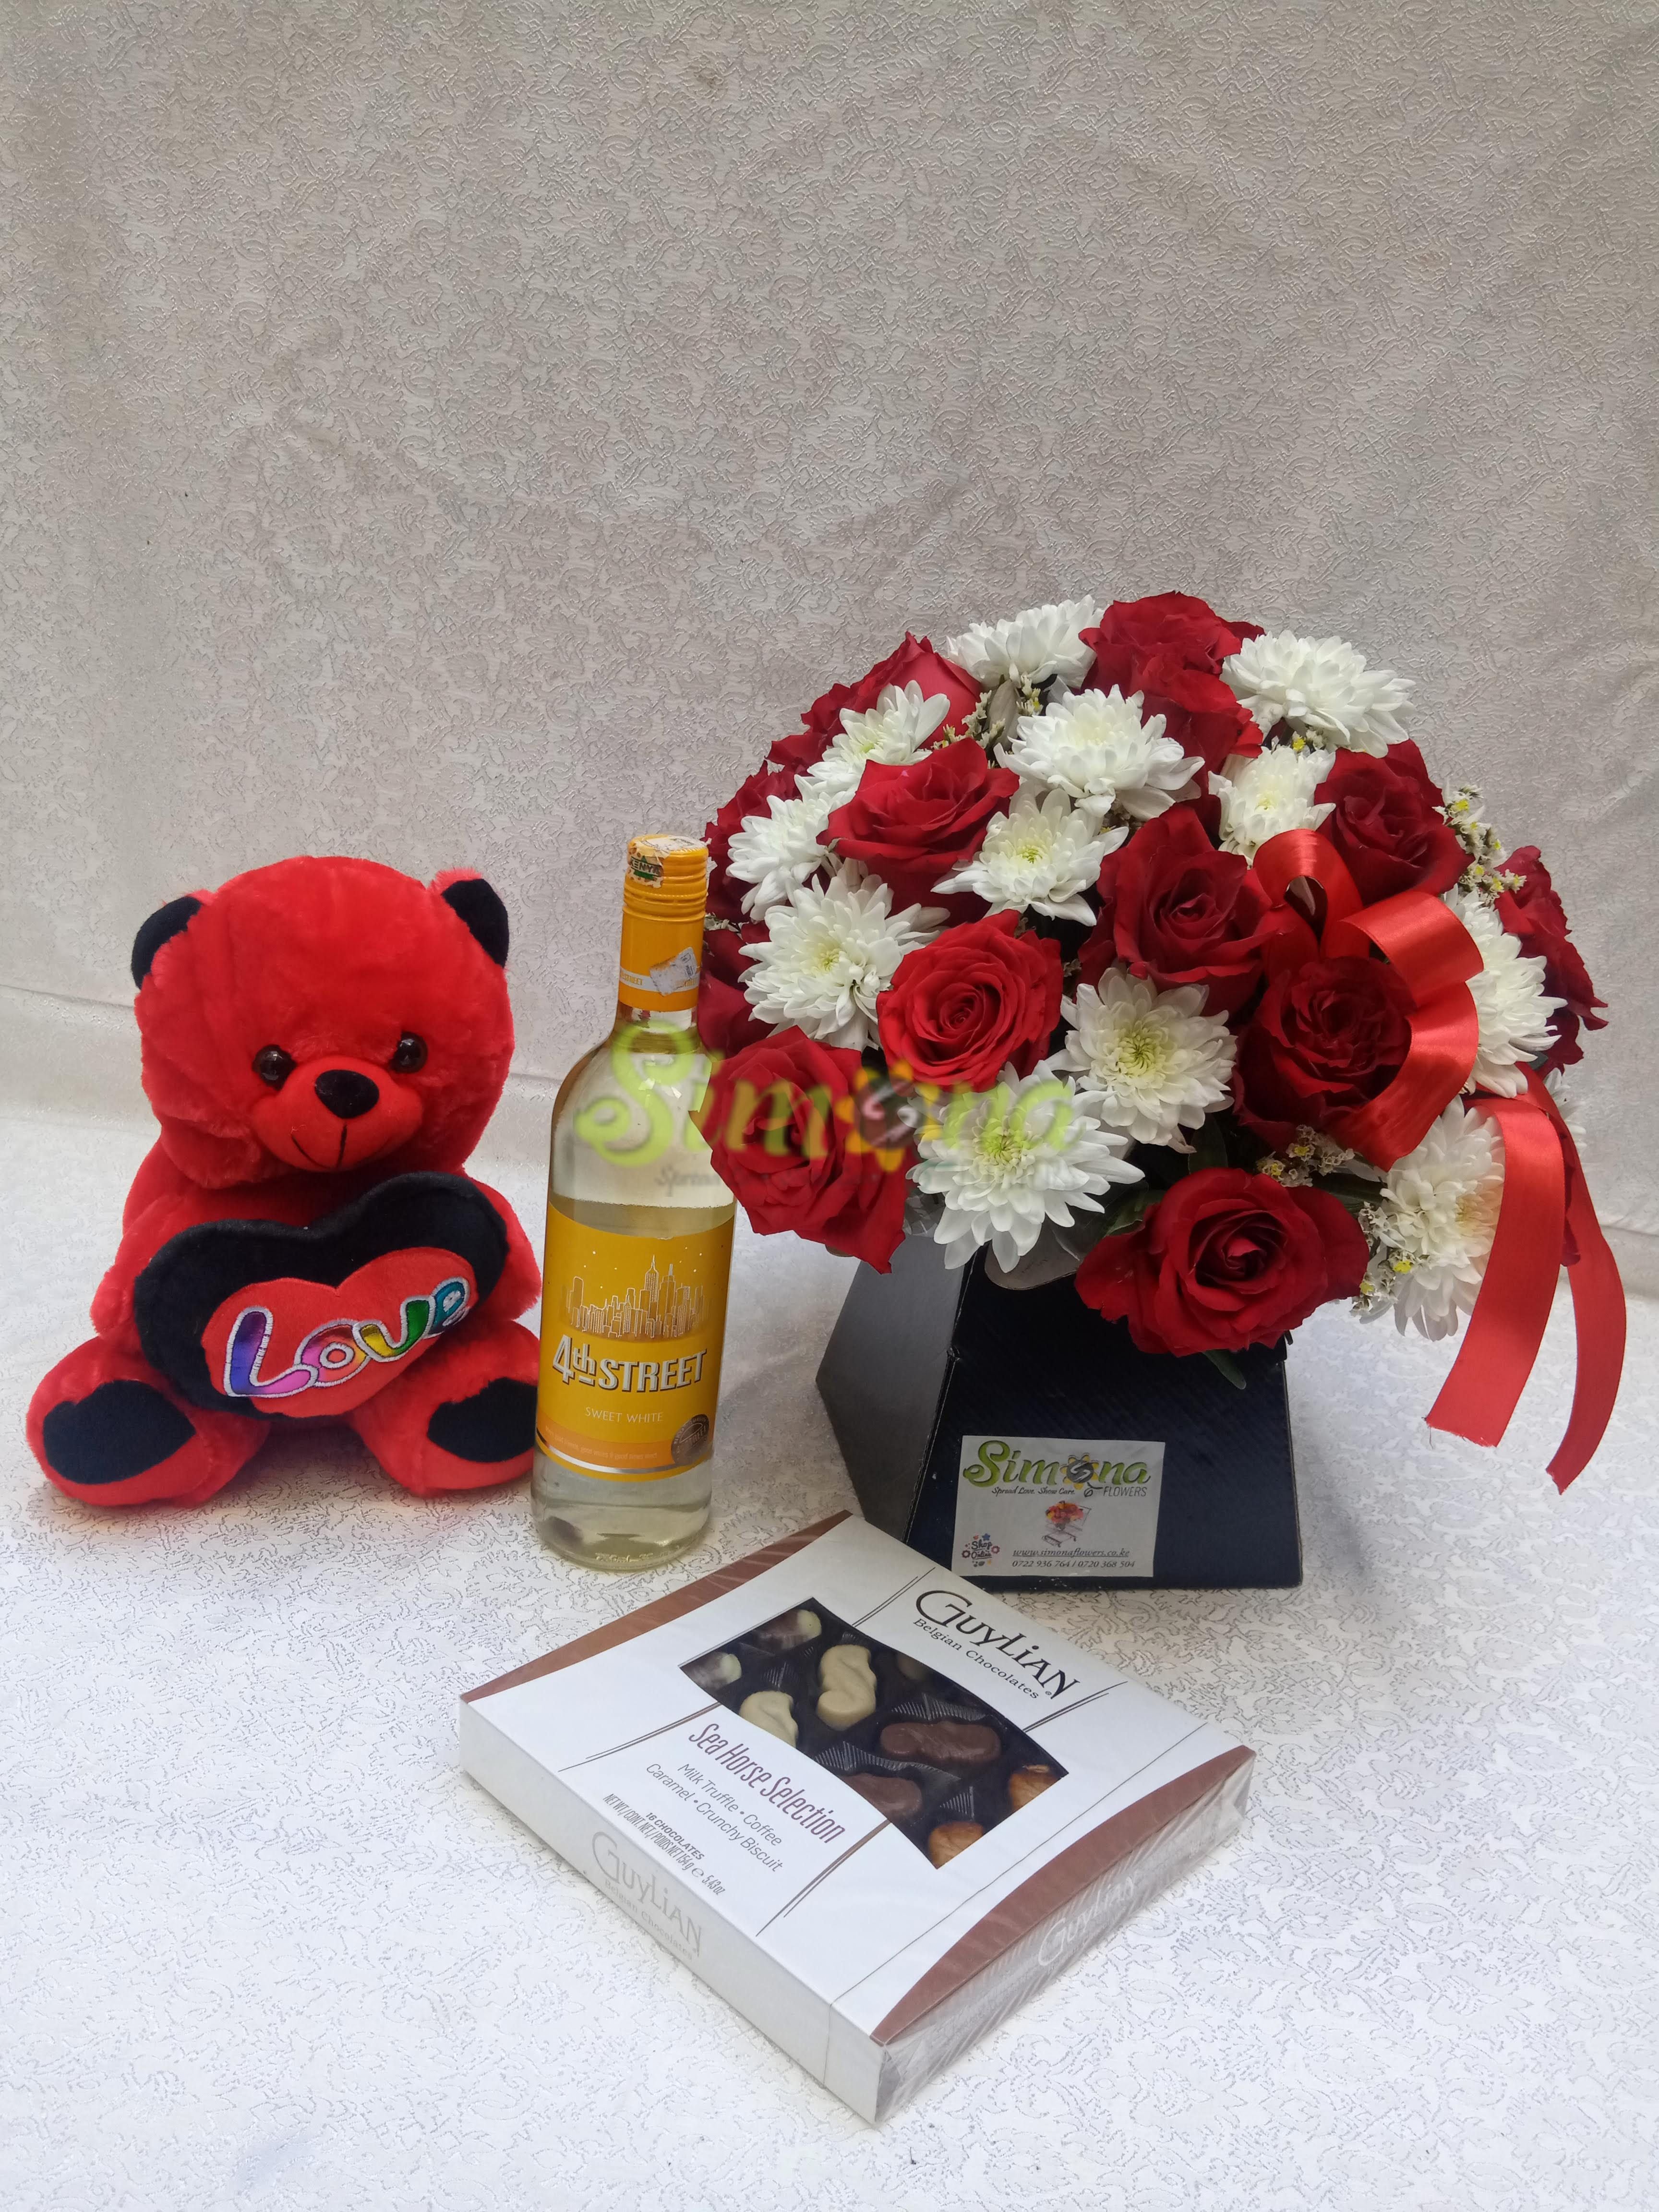 Adorable bouquet with teddy bear, Guylian chocolate and red wine